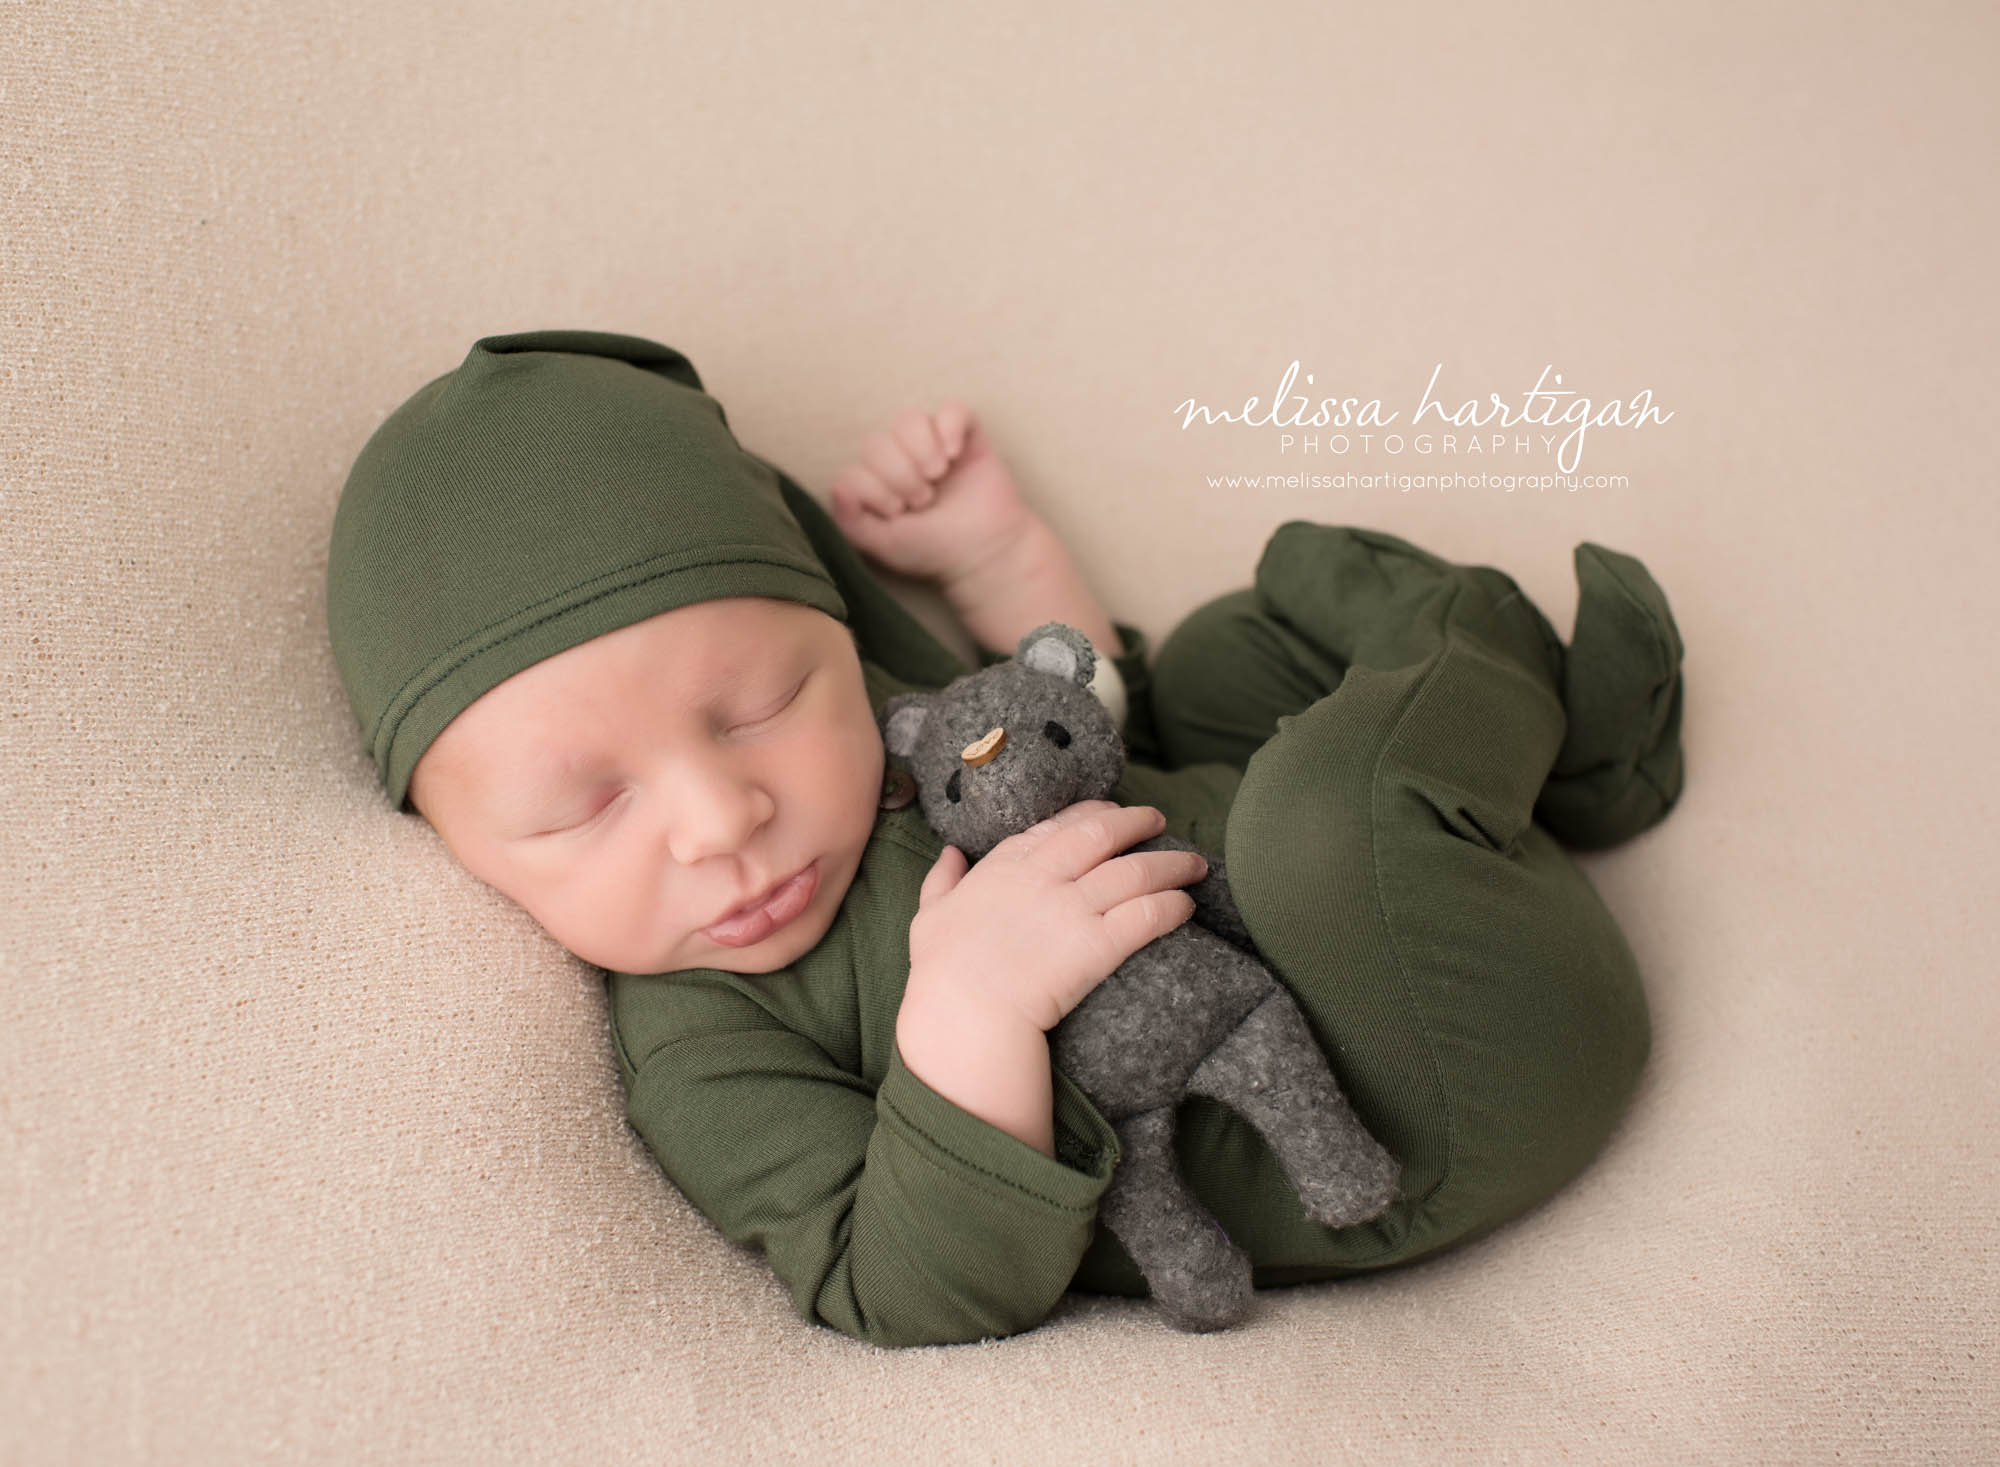 CT Baby Photography neworn boy in green outfit and hat holding stuffed animal